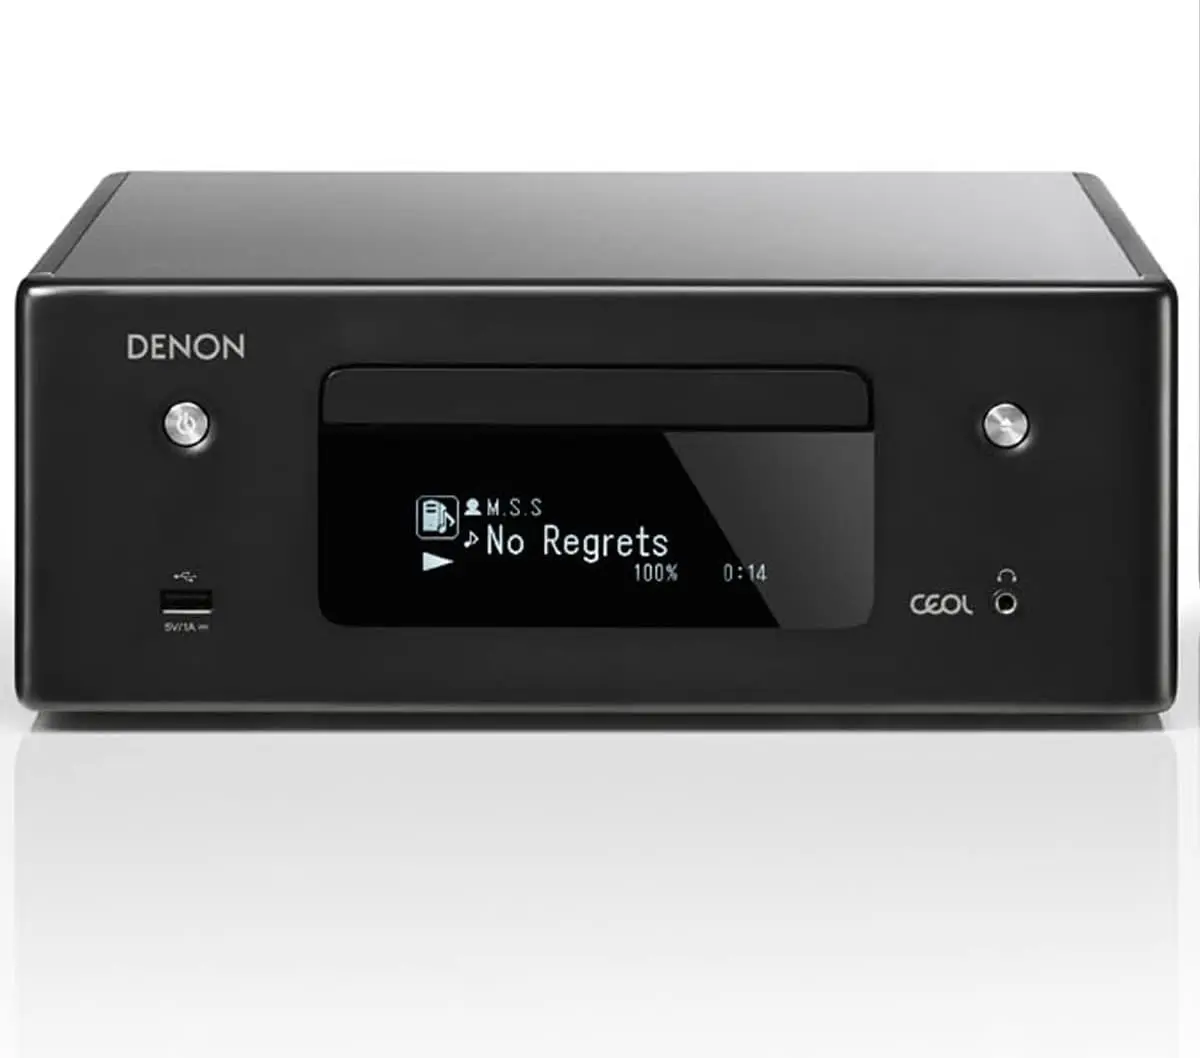 

Denon Bluetooth Receiver RCD-N10, with Integrated CD Player, AM/FM Tuner, & Wi-Fi, for Smaller Rooms and Houses